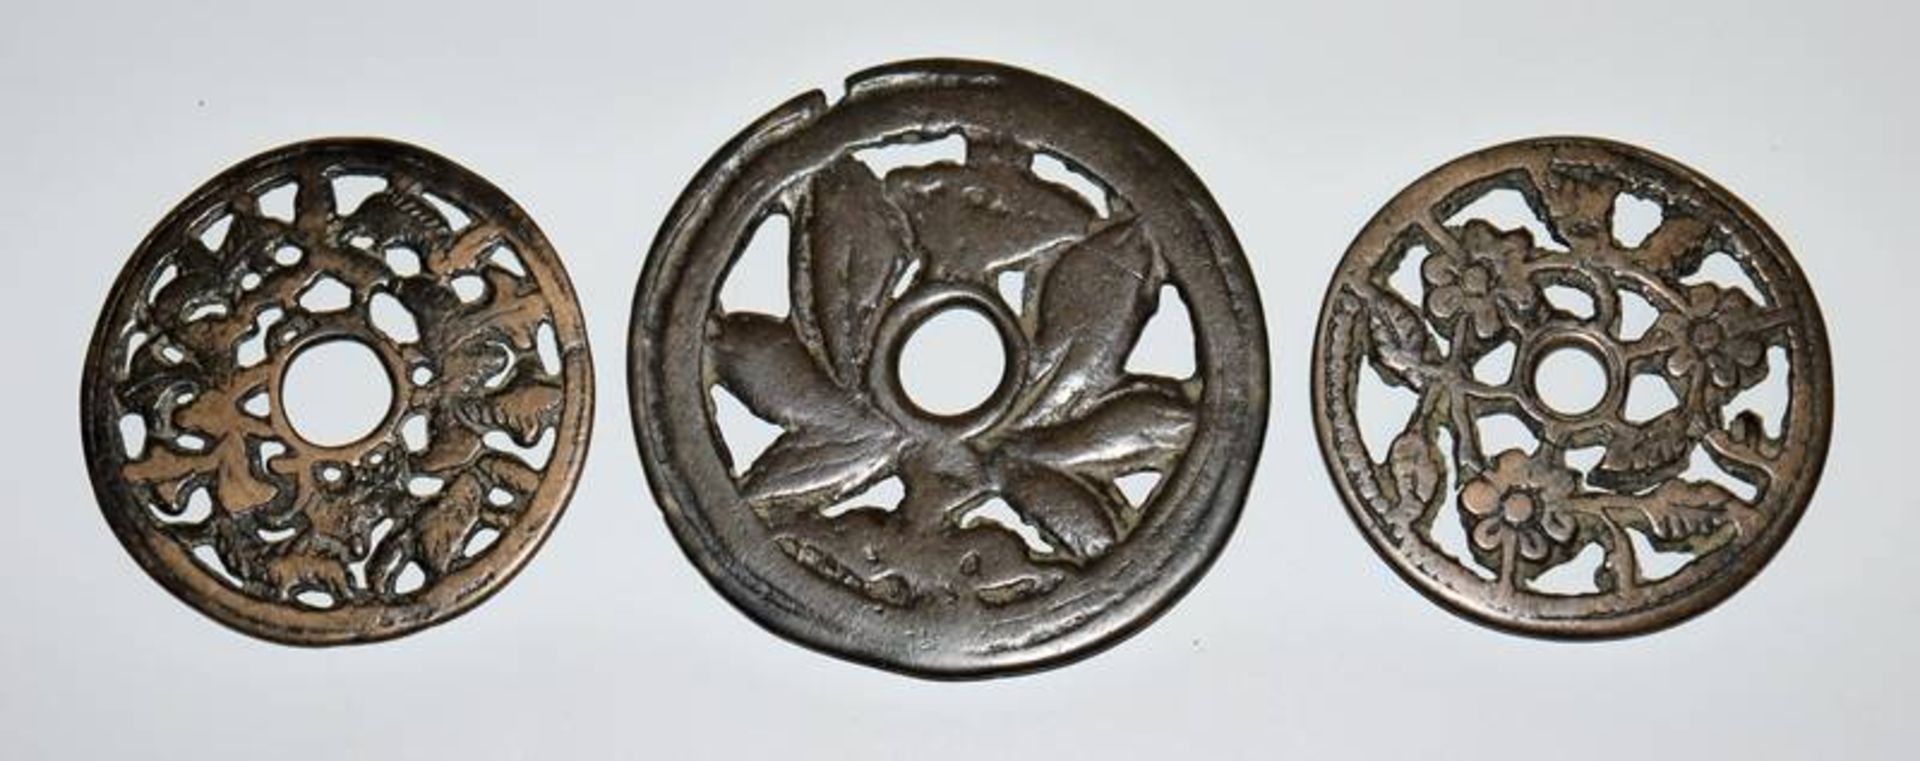 Three numismatic charms with flowers from the Chinese Ming/Qing period